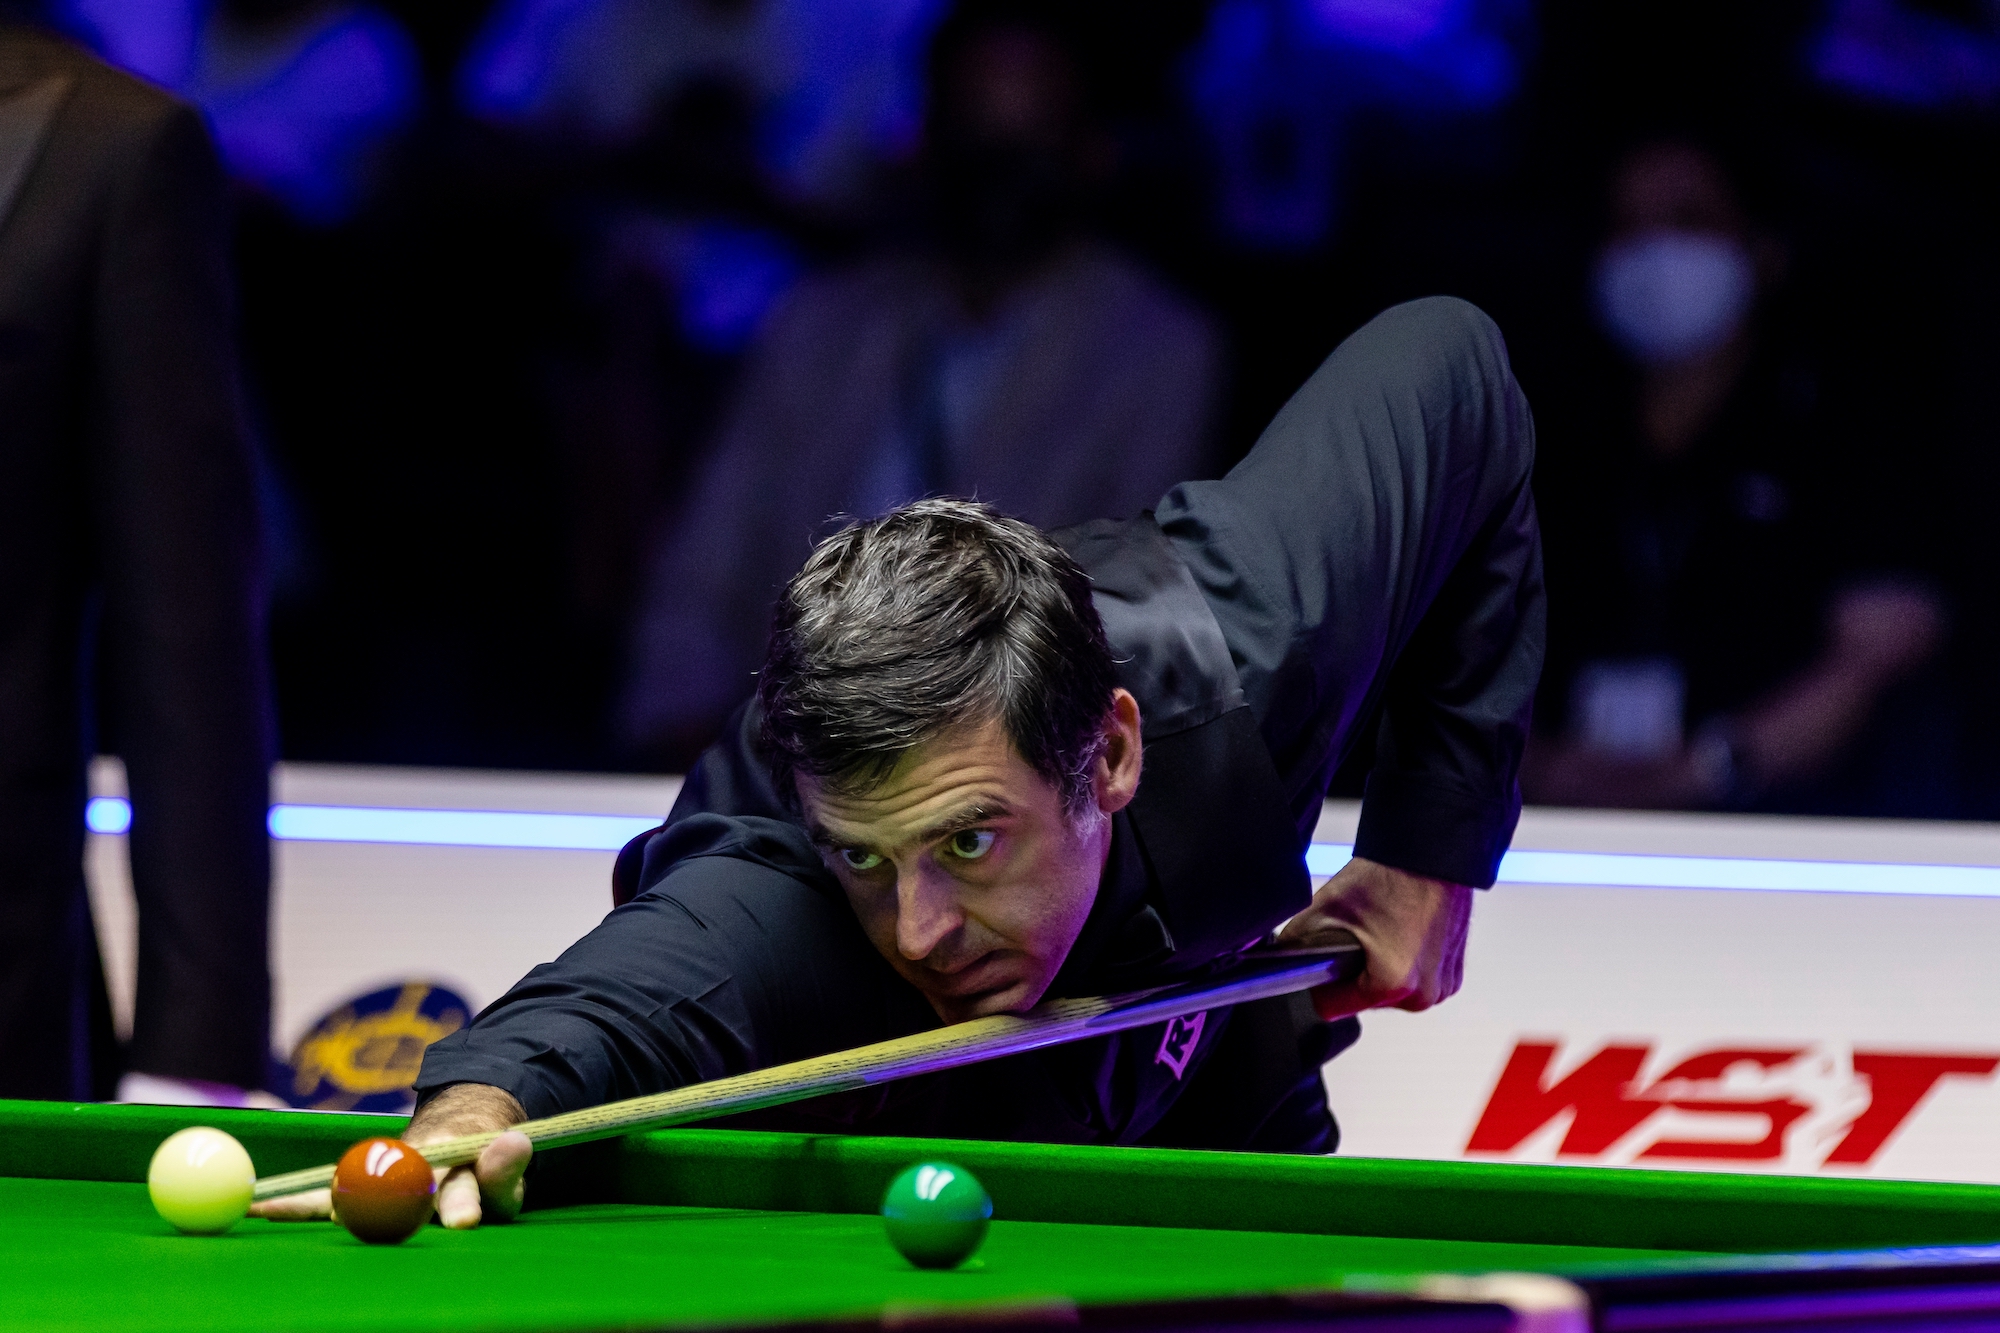 The world’s no. 1 snooker player looks forward to ‘Christmas in Macao’